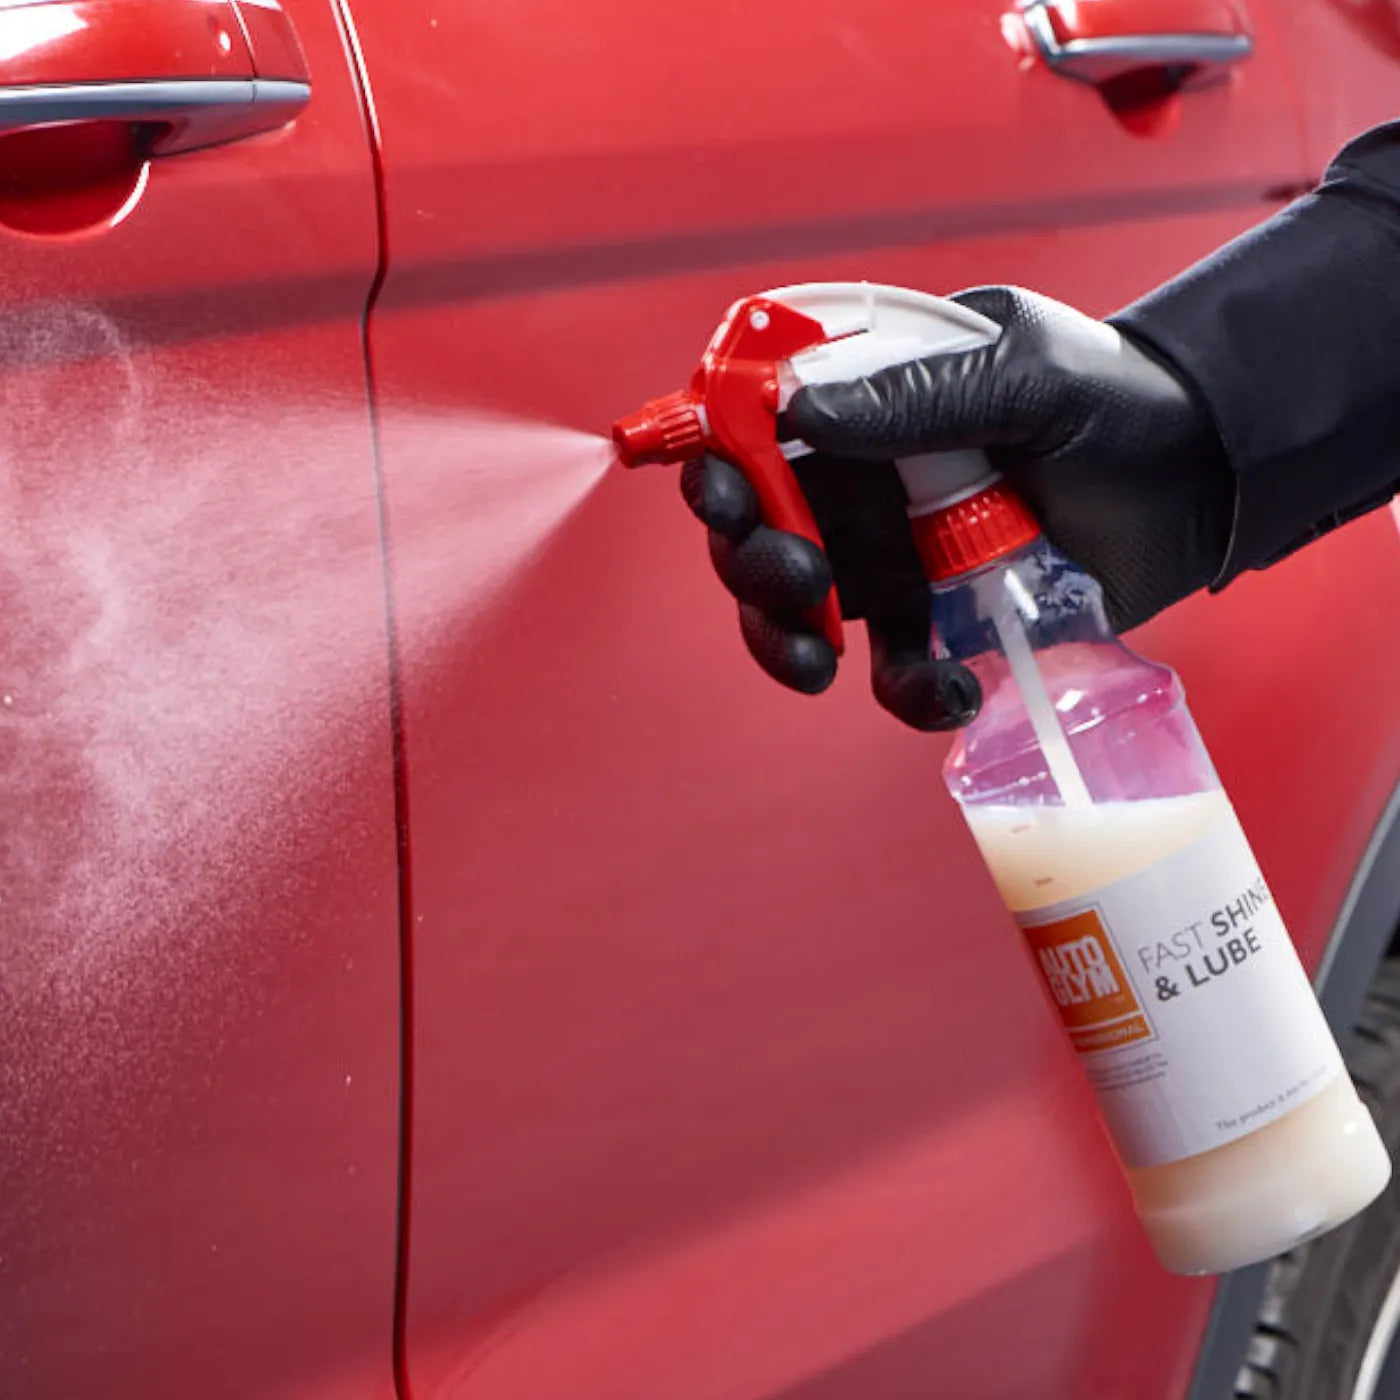 Autoglym Fast Shine and Lube Quick Detailer. Autoglym Clay Bar lubricant, Clay lube.  Autoglym Rapid Detailer. Autoglym Ireland. Autoglym Cork Ireland